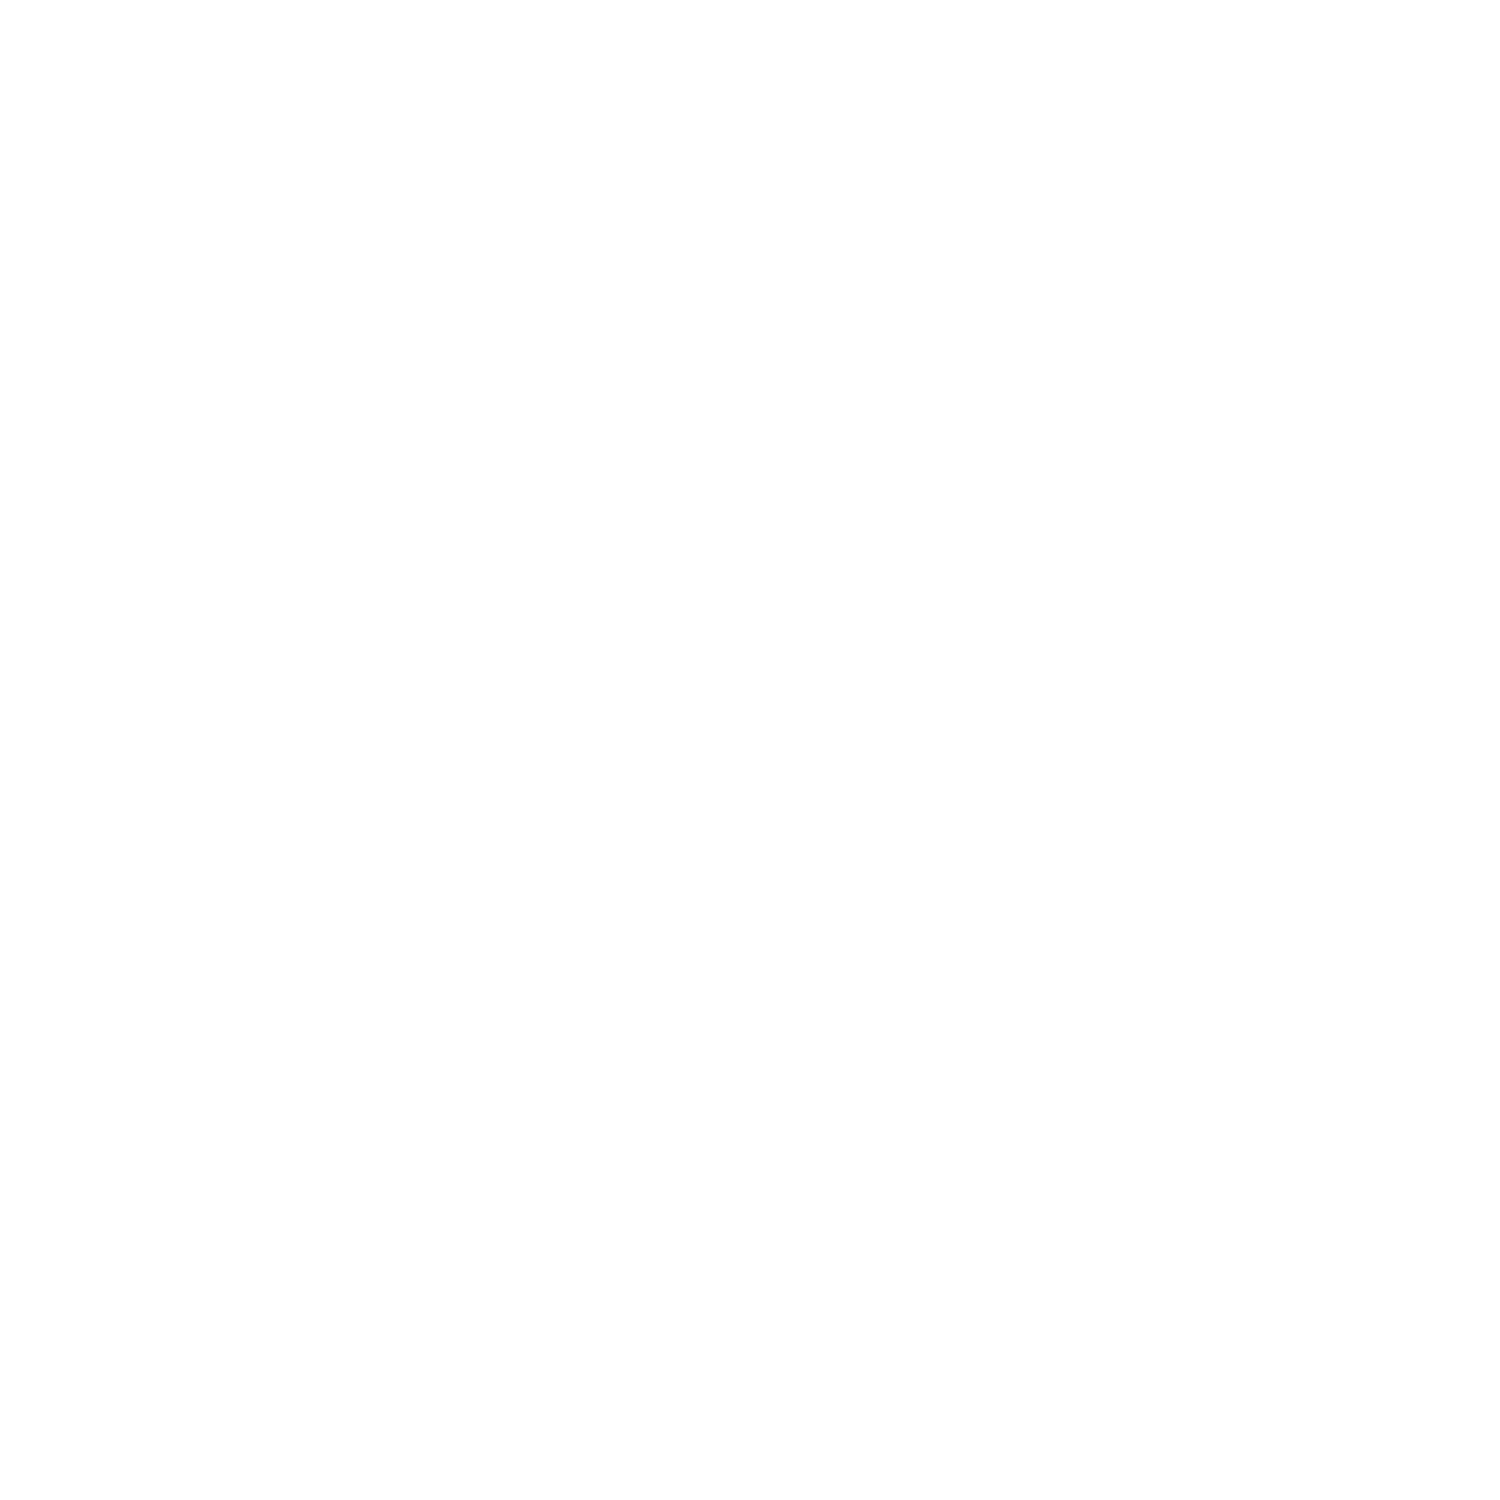 Nature Made Heaven Scent